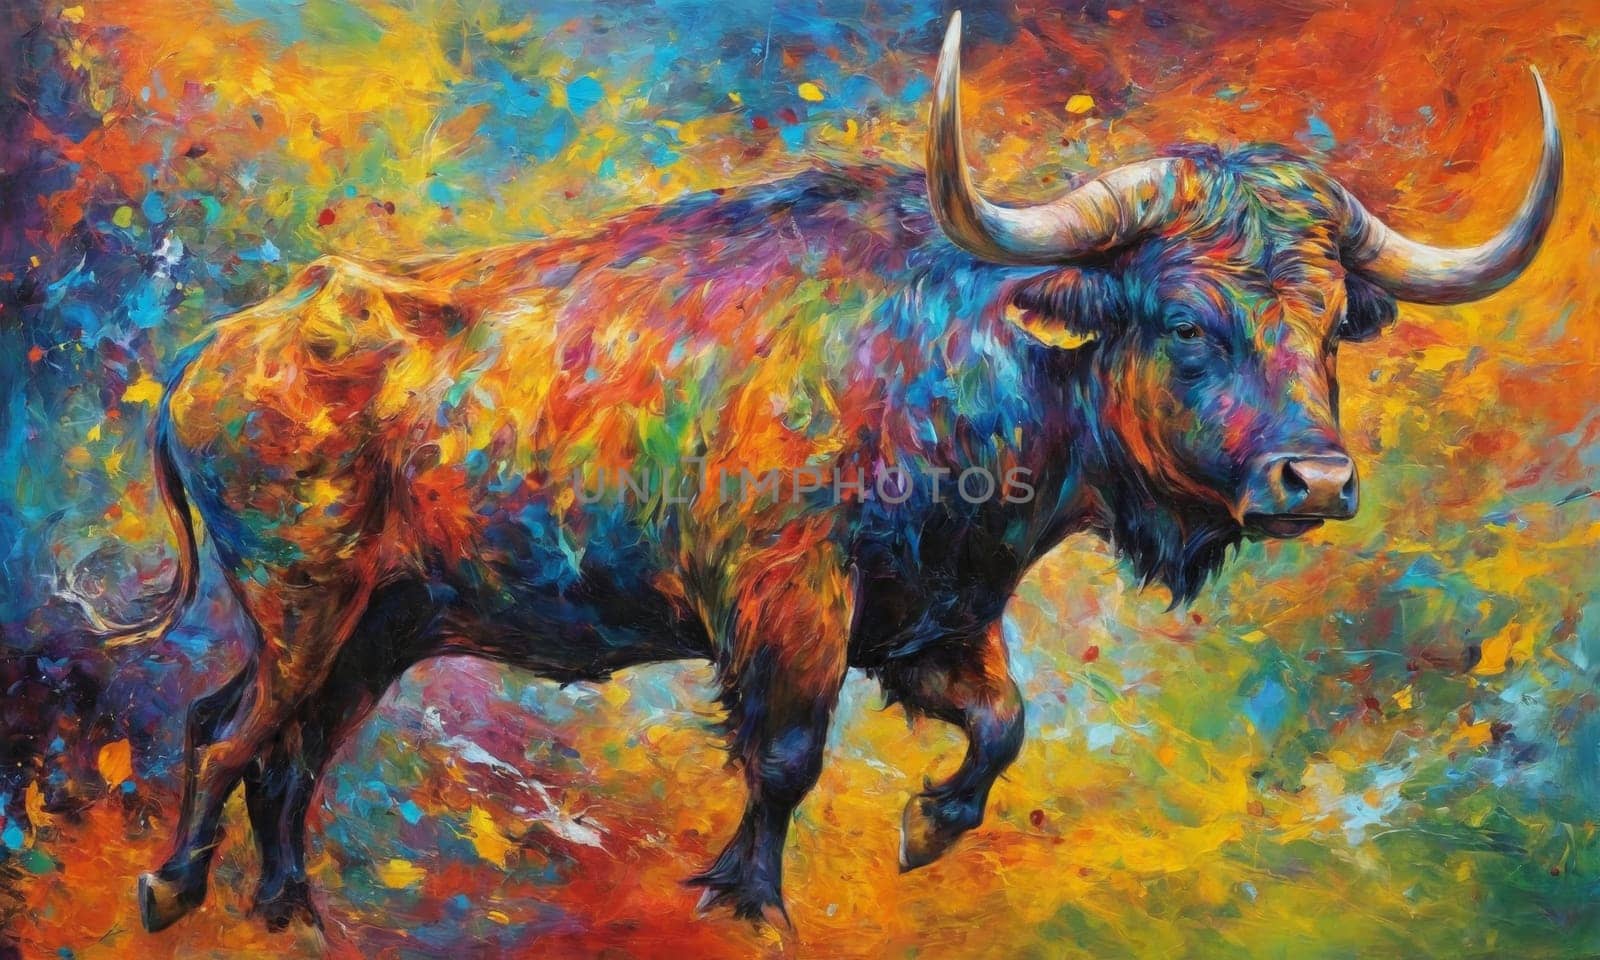 a bull on a multicolored background. Digital painting by Andre1ns